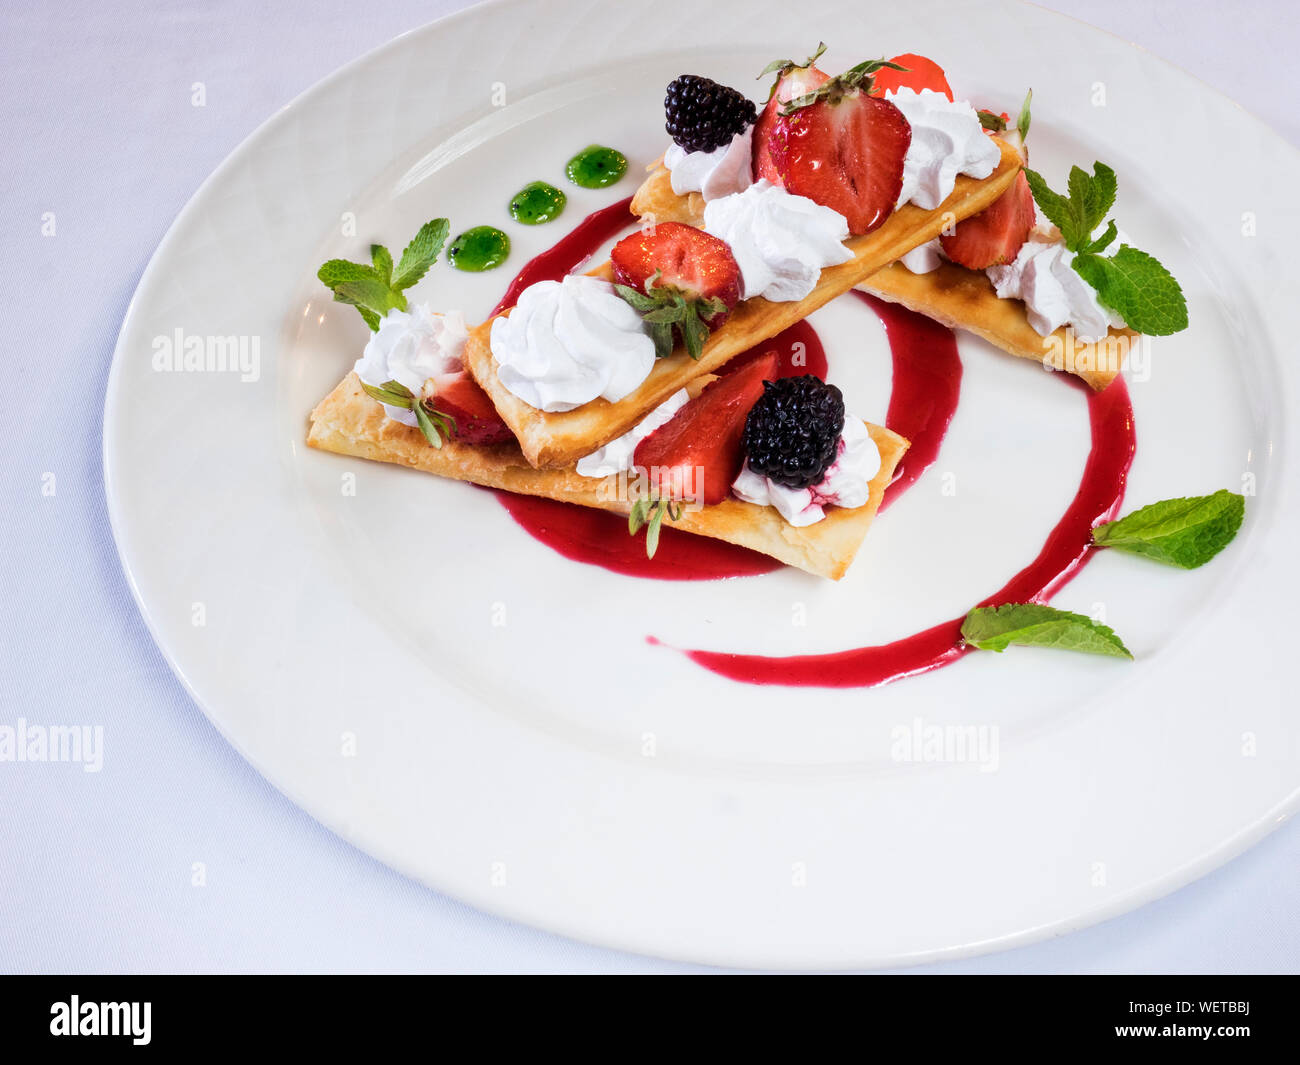 Close-up Of Puff Pastries With Strawberries Served In Plate On Table Stock Photo